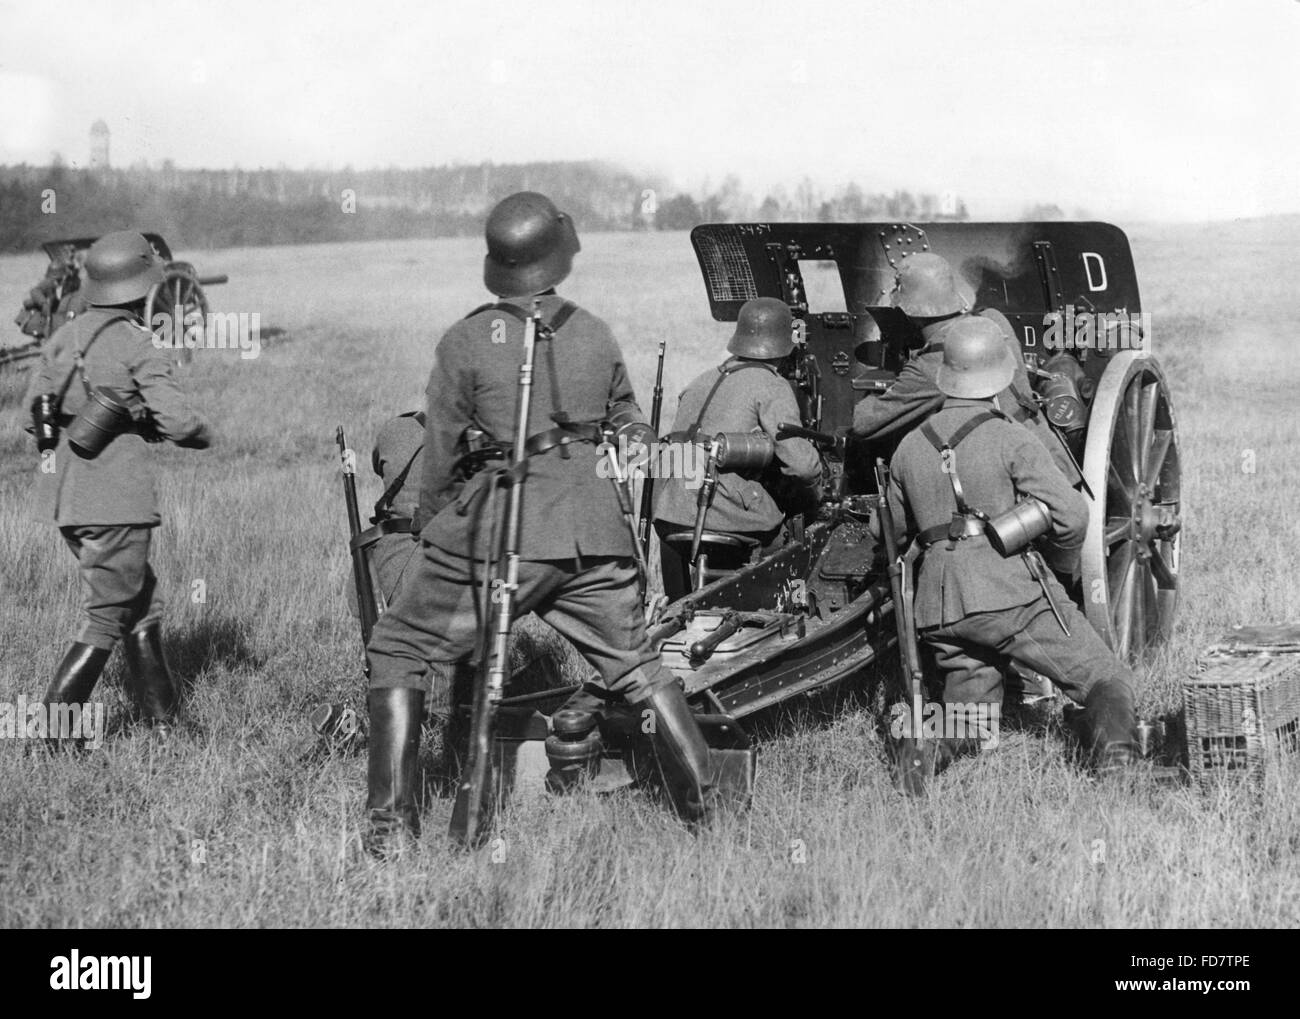 reichswehr-soldiers-with-guns-during-a-maneuver-early-1930s-FD7TPE.jpg